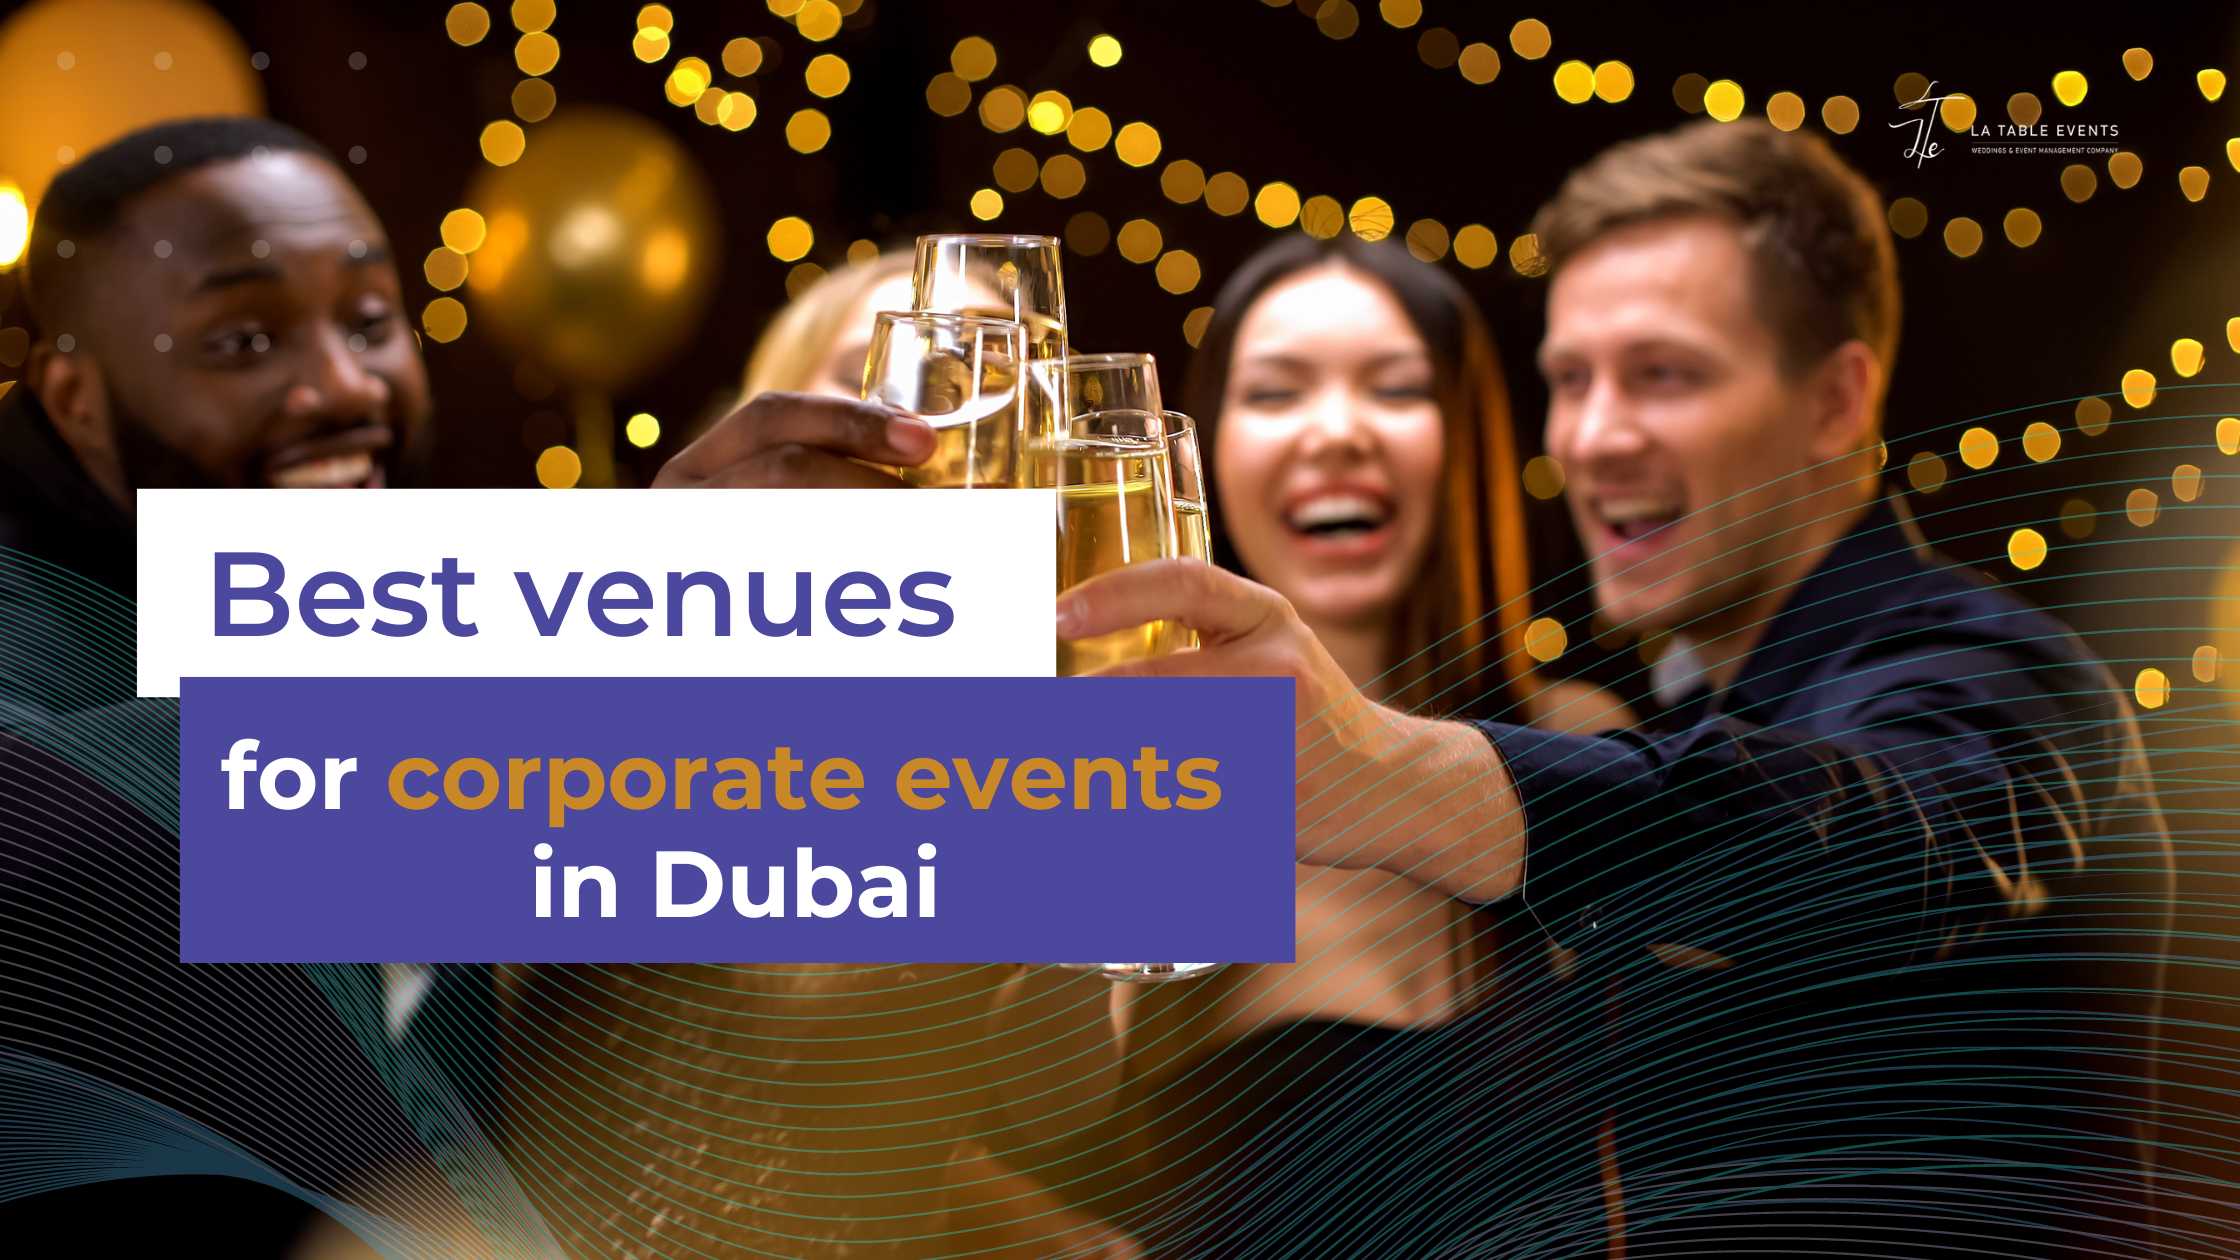 Best venues for corporate events in Dubai